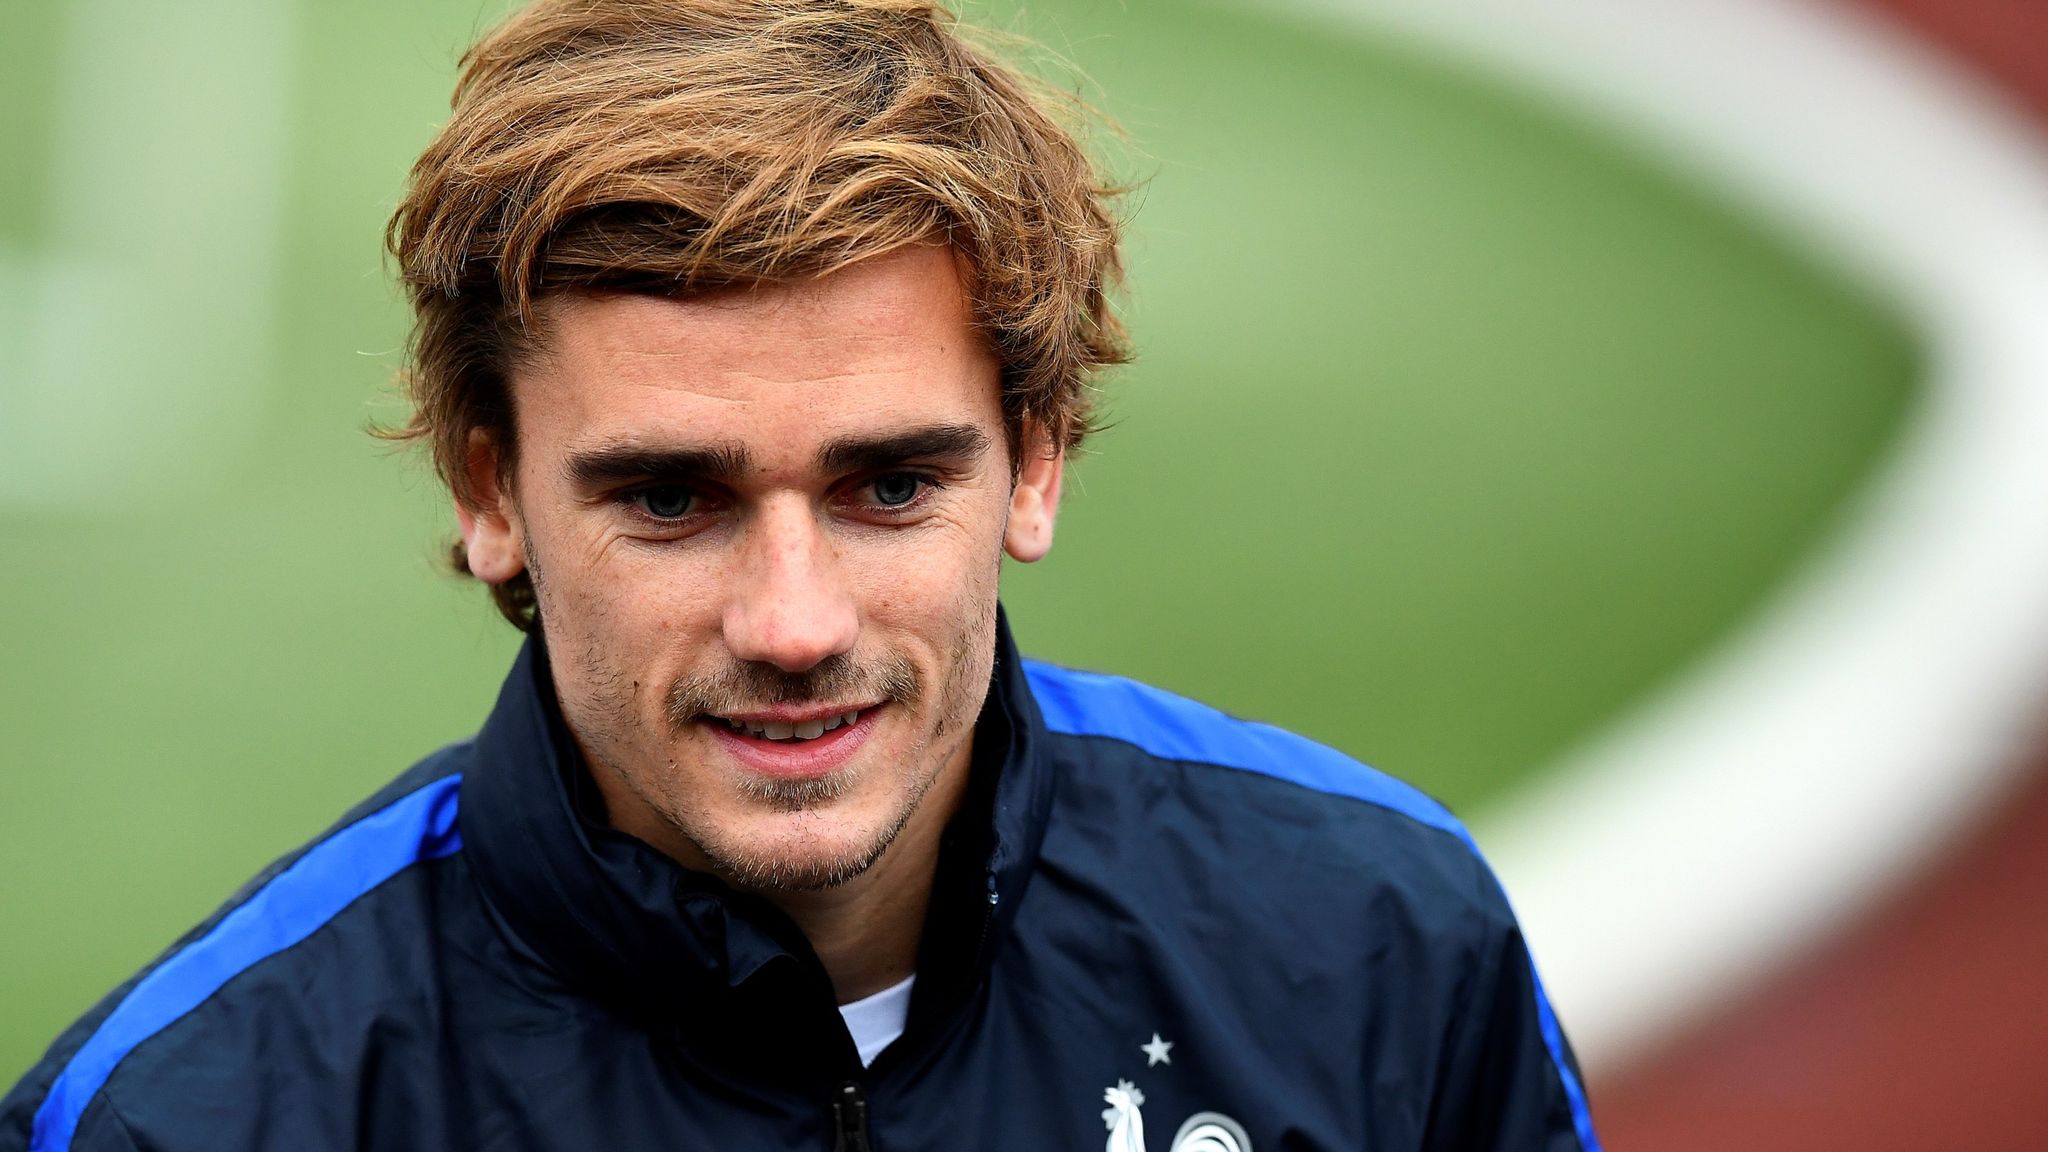 Antoine Griezmann to stay at Atletico Madrid, says club president |  Football News | Sky Sports